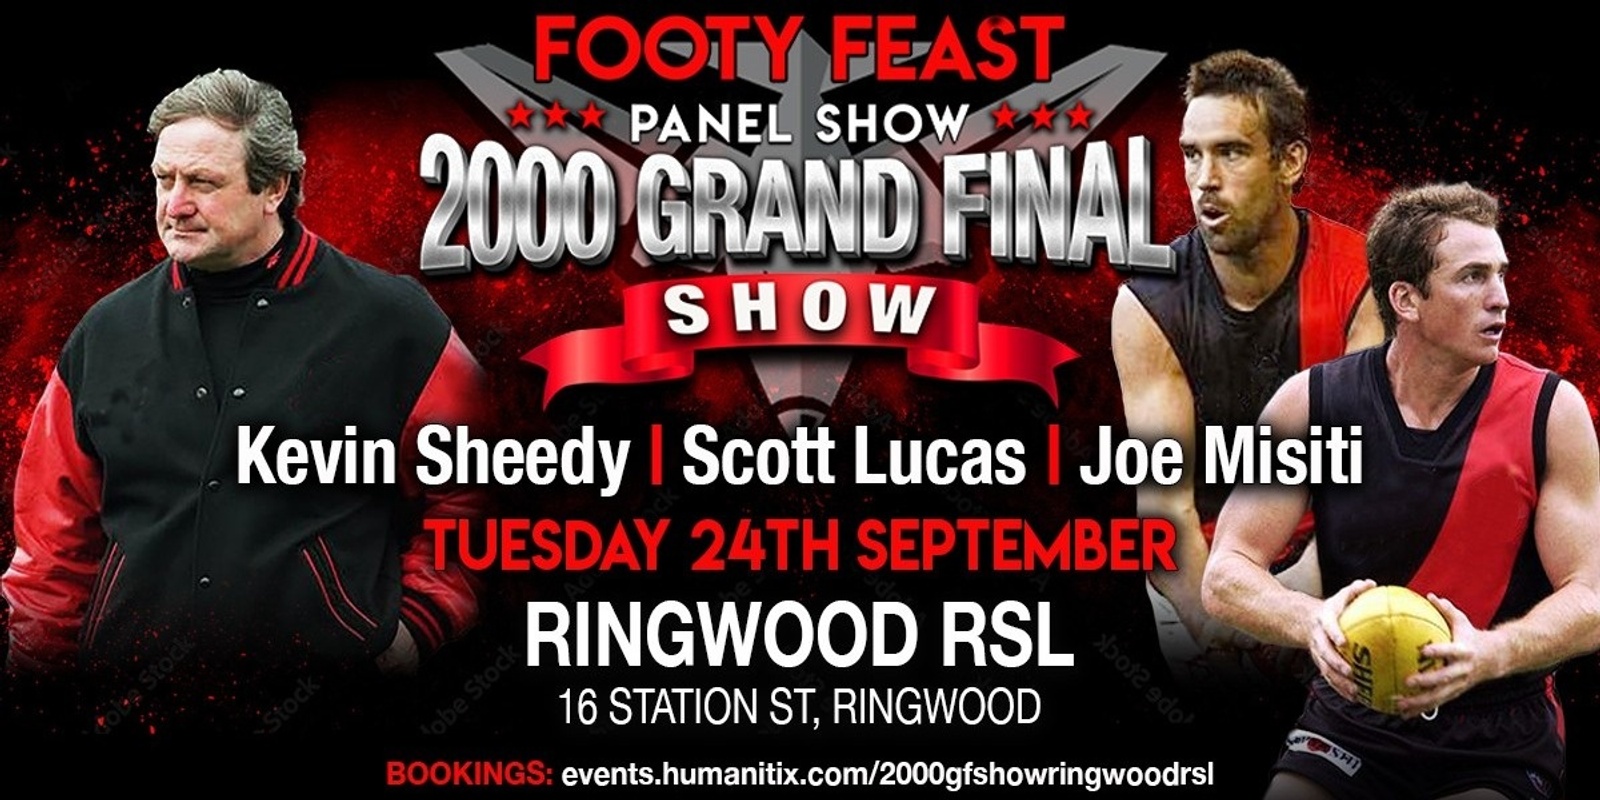 Banner image for 2000 Grand Final "Live Show"